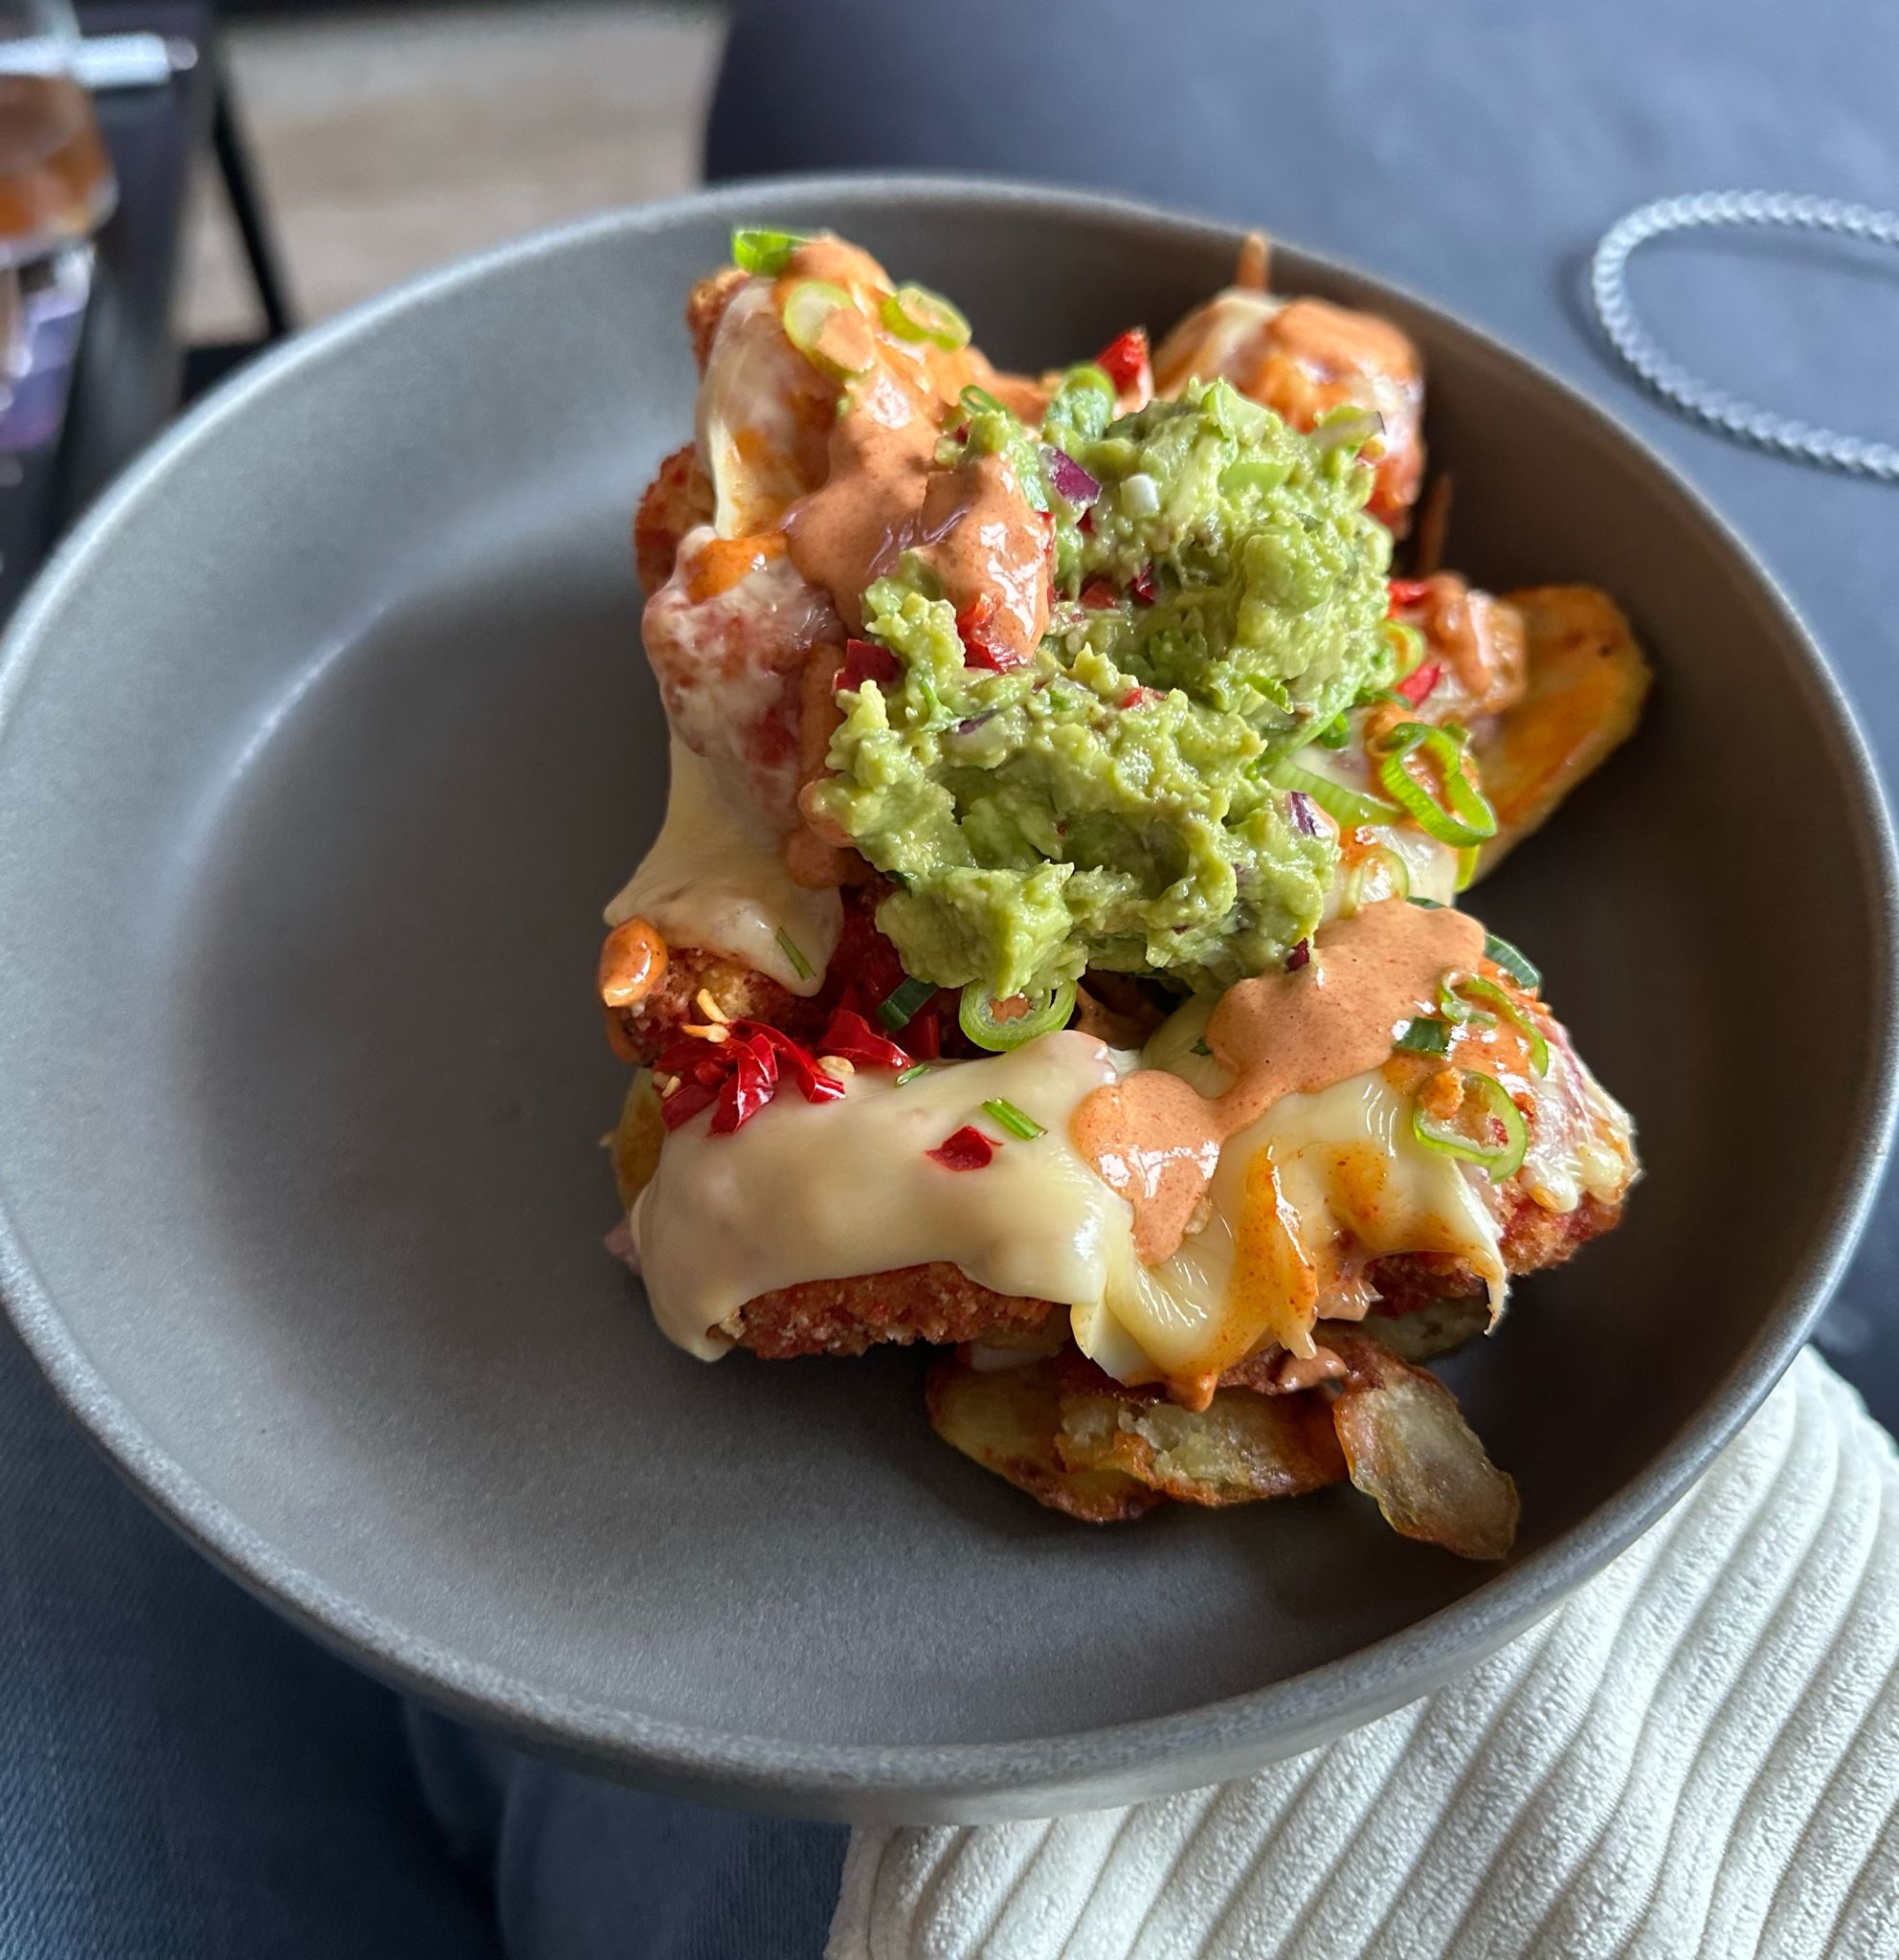 Loaded chicken fries with guacamole and smoky sauce